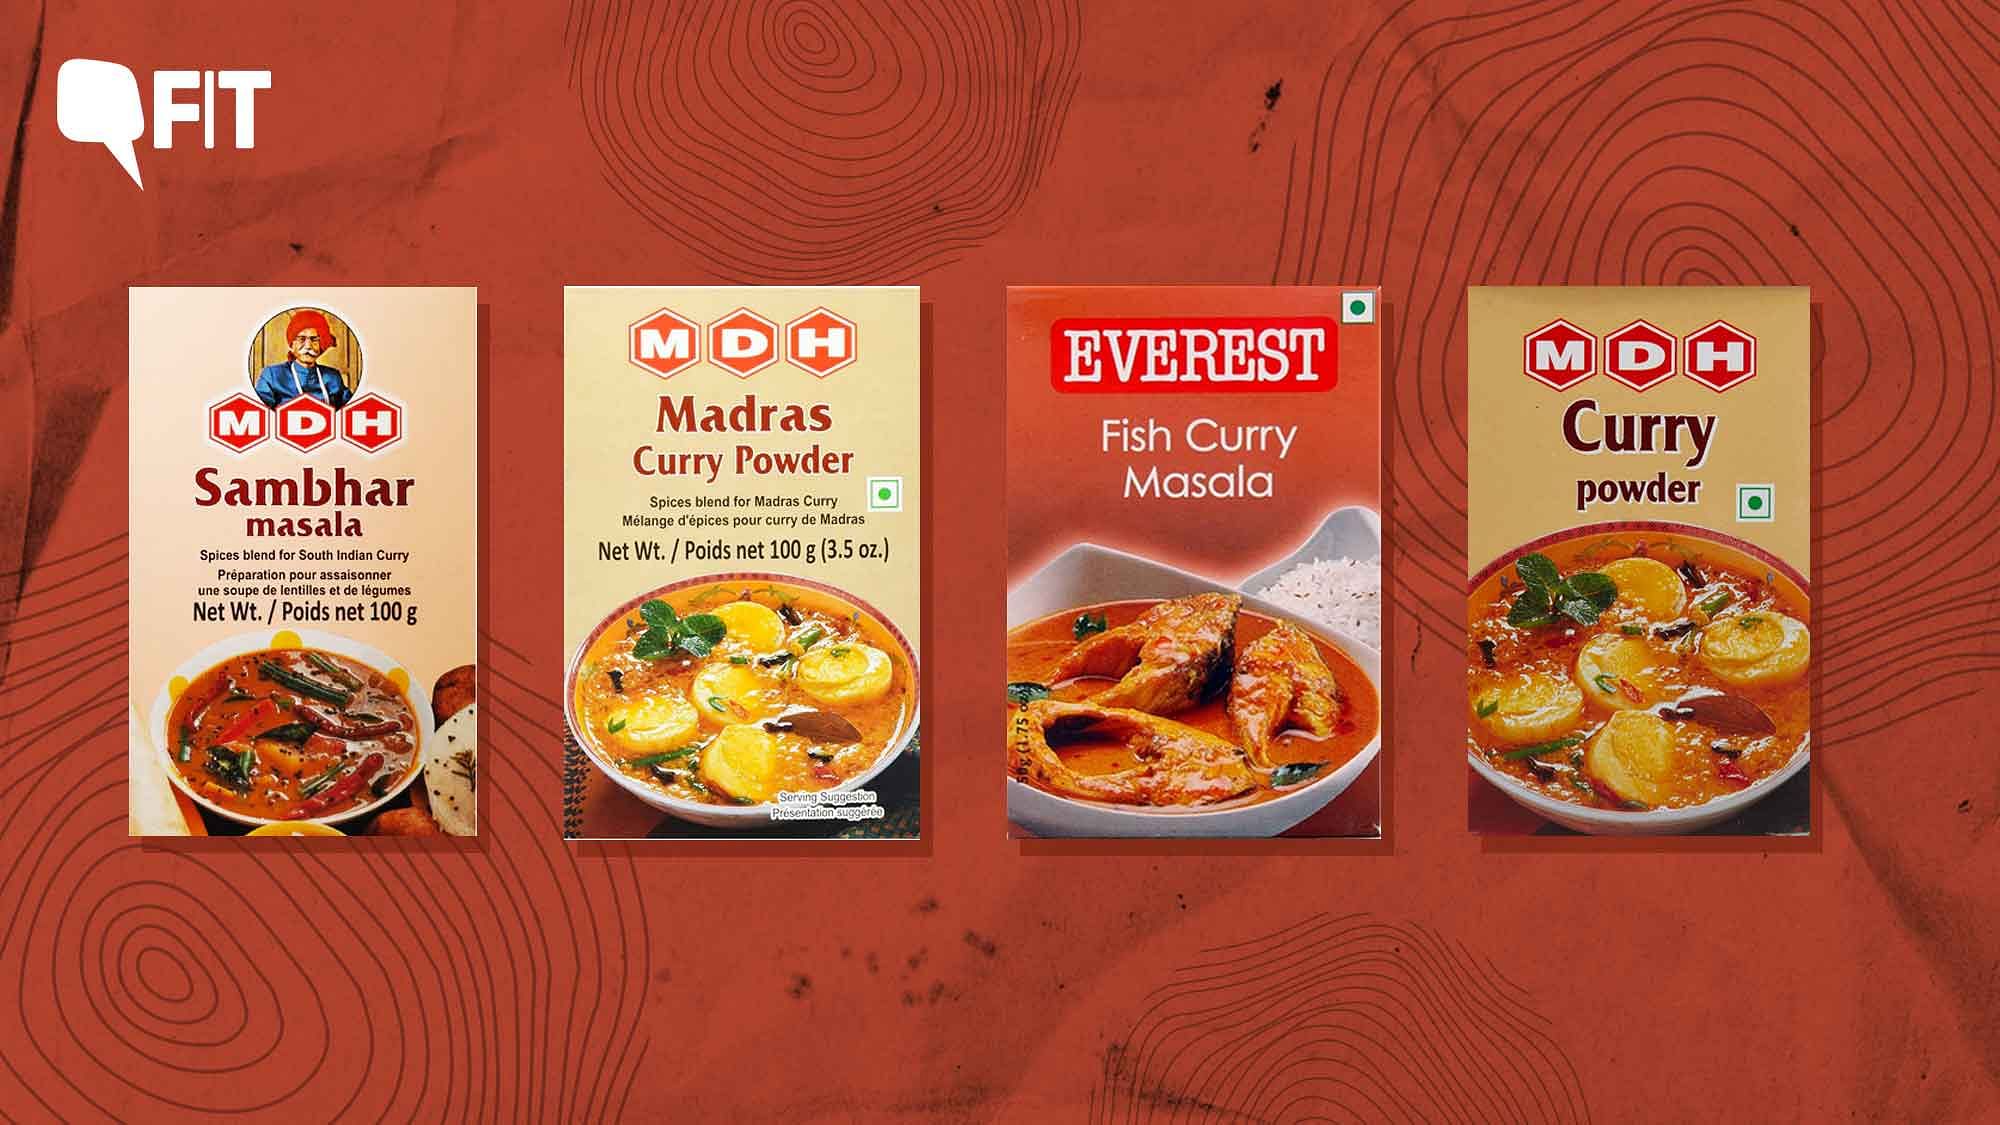 Explained: Why Are MDH, Everest Masala Under Scanner in Hong Kong & Singapore?